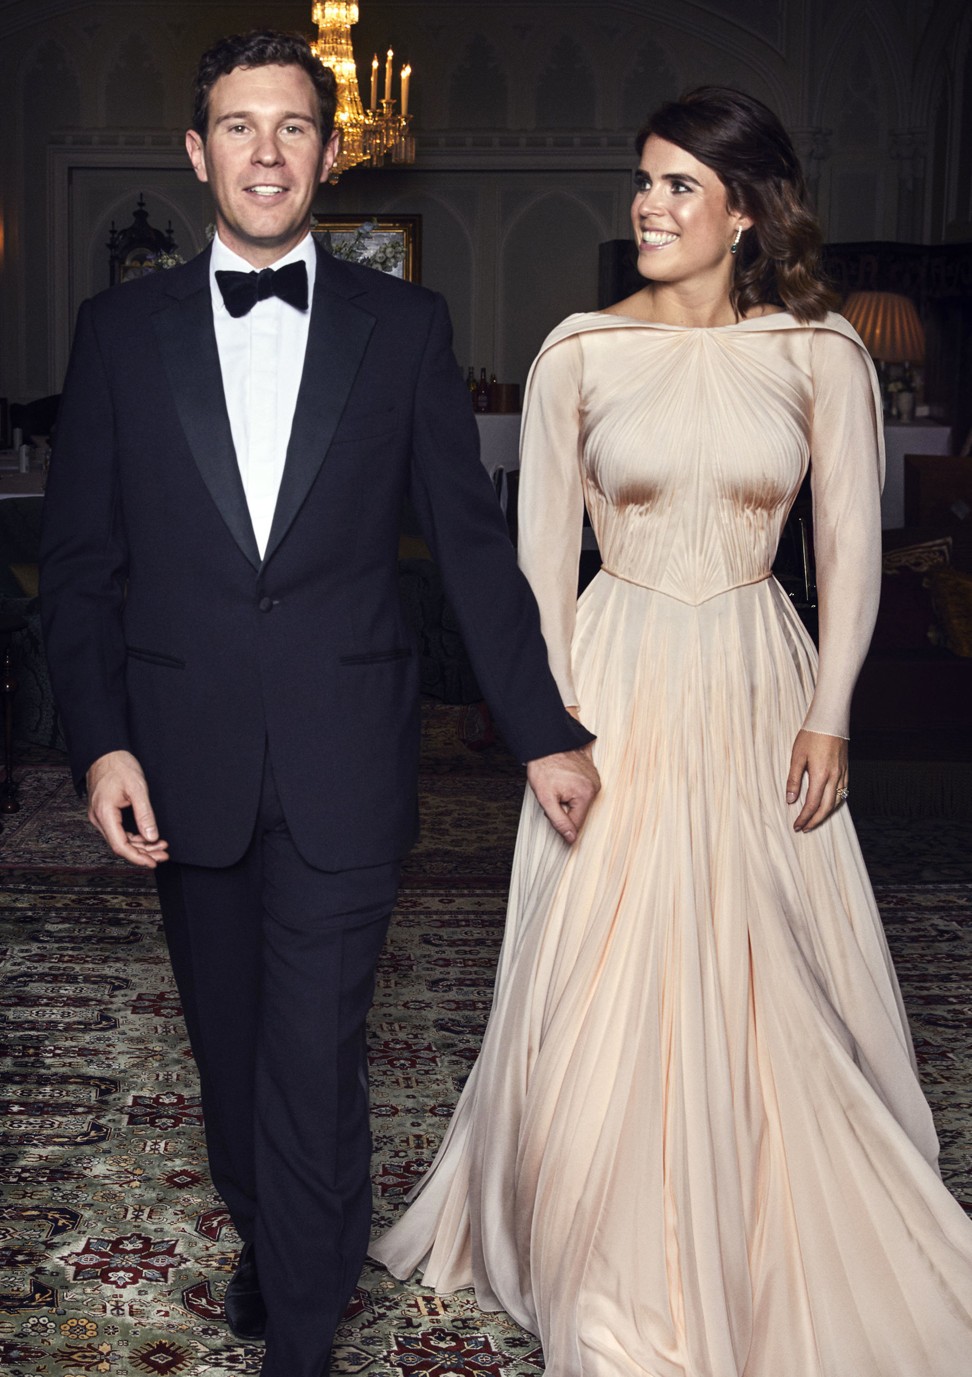 Britain's Princess Eugenie of York and Jack Brooksbank are photographed at Royal Lodge, Windsor, England, following their wedding in October 2018. Photo: Buckingham Palace via AP